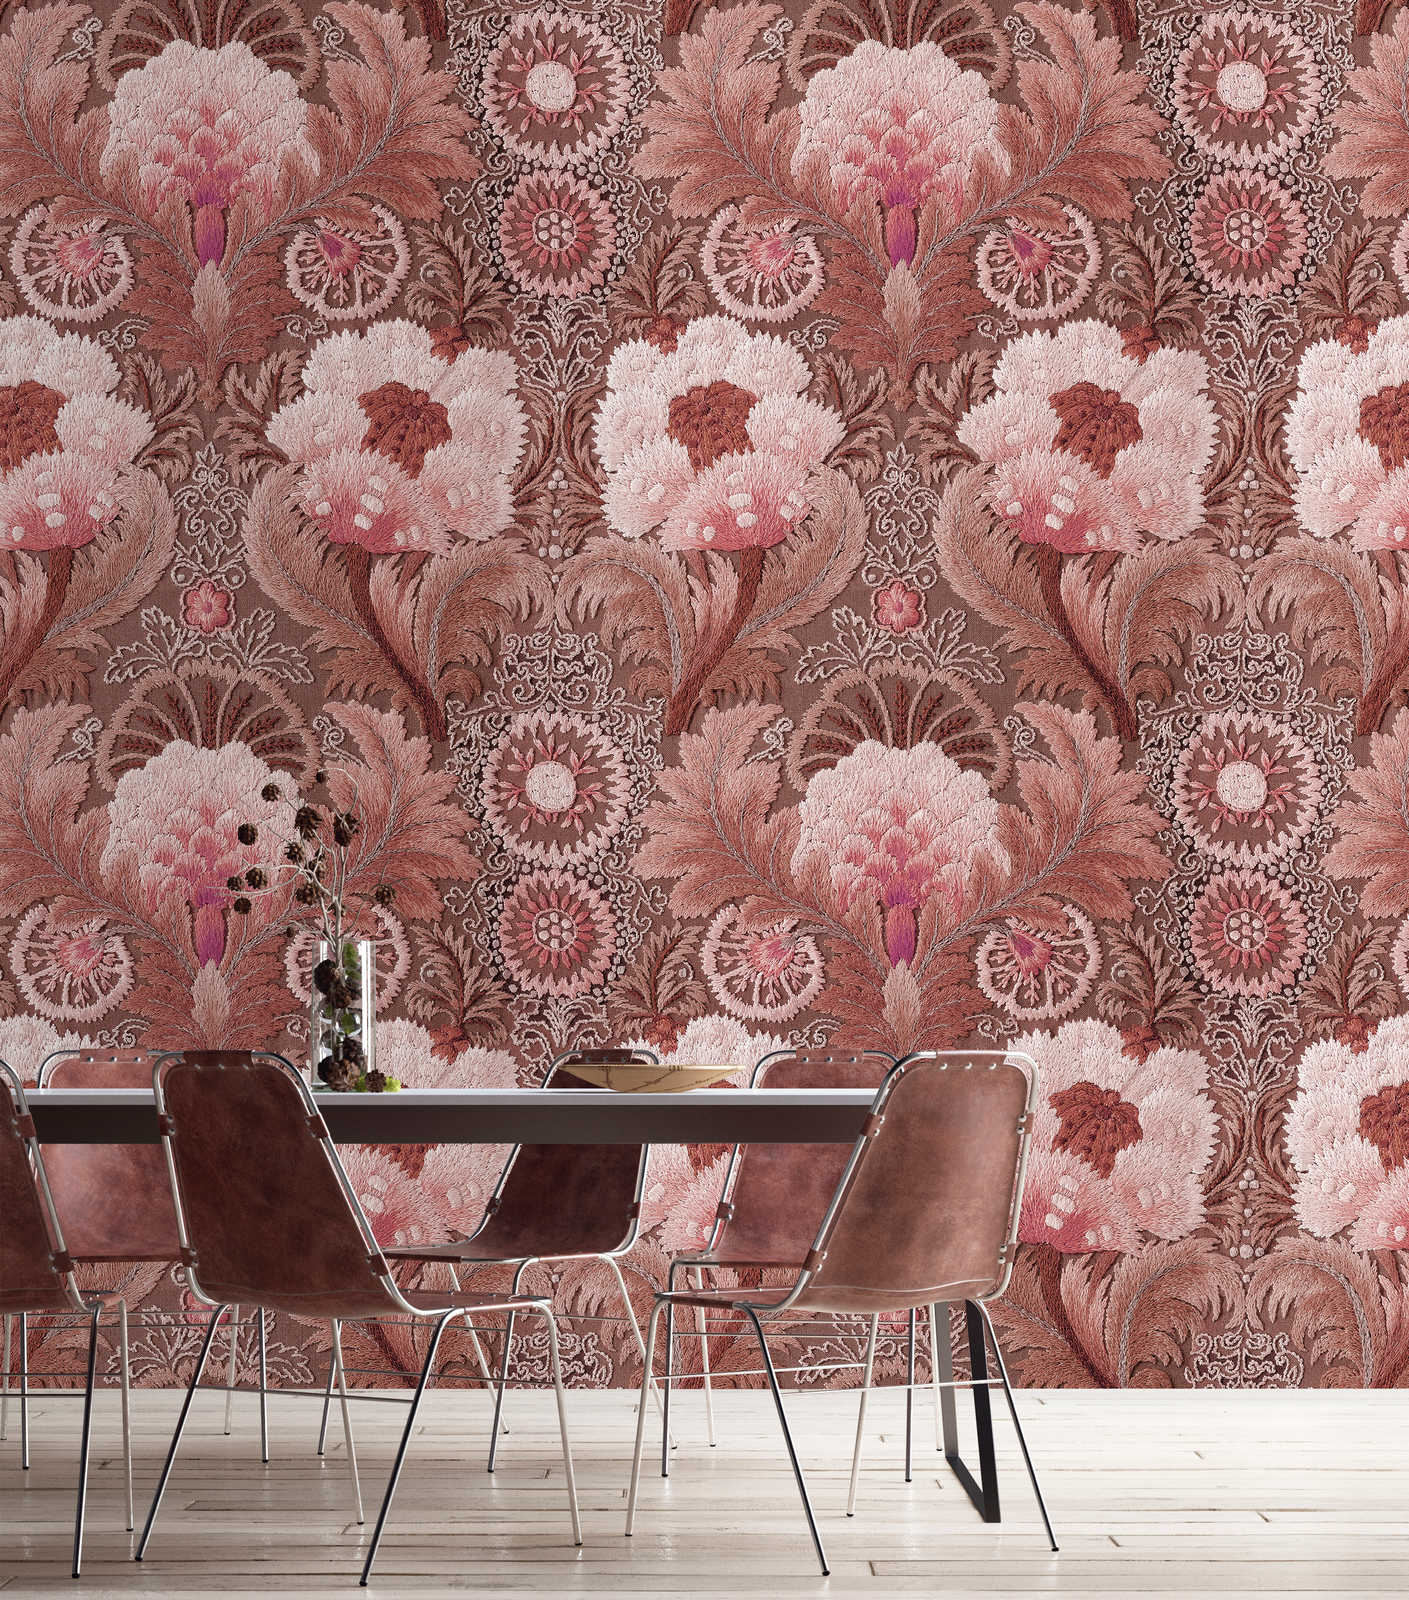             Chateau 2 - pink mural ornaments in opulent style
        